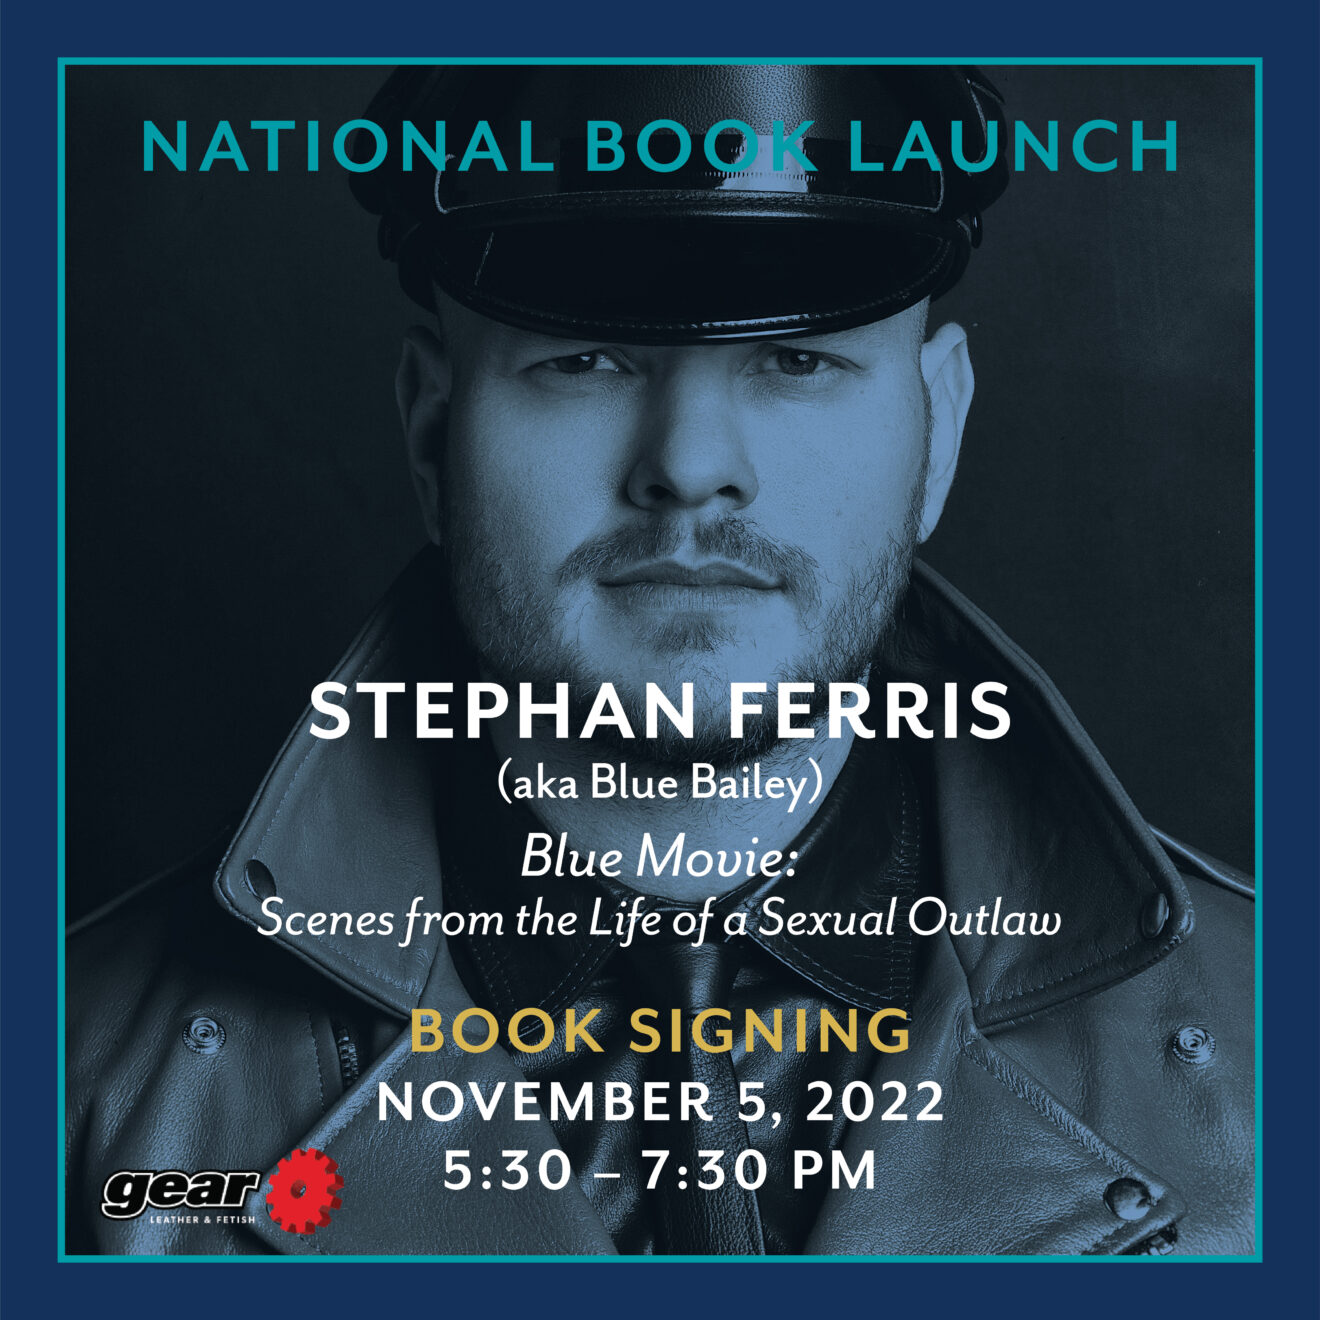 Stephan Ferris Book Signing at Gear